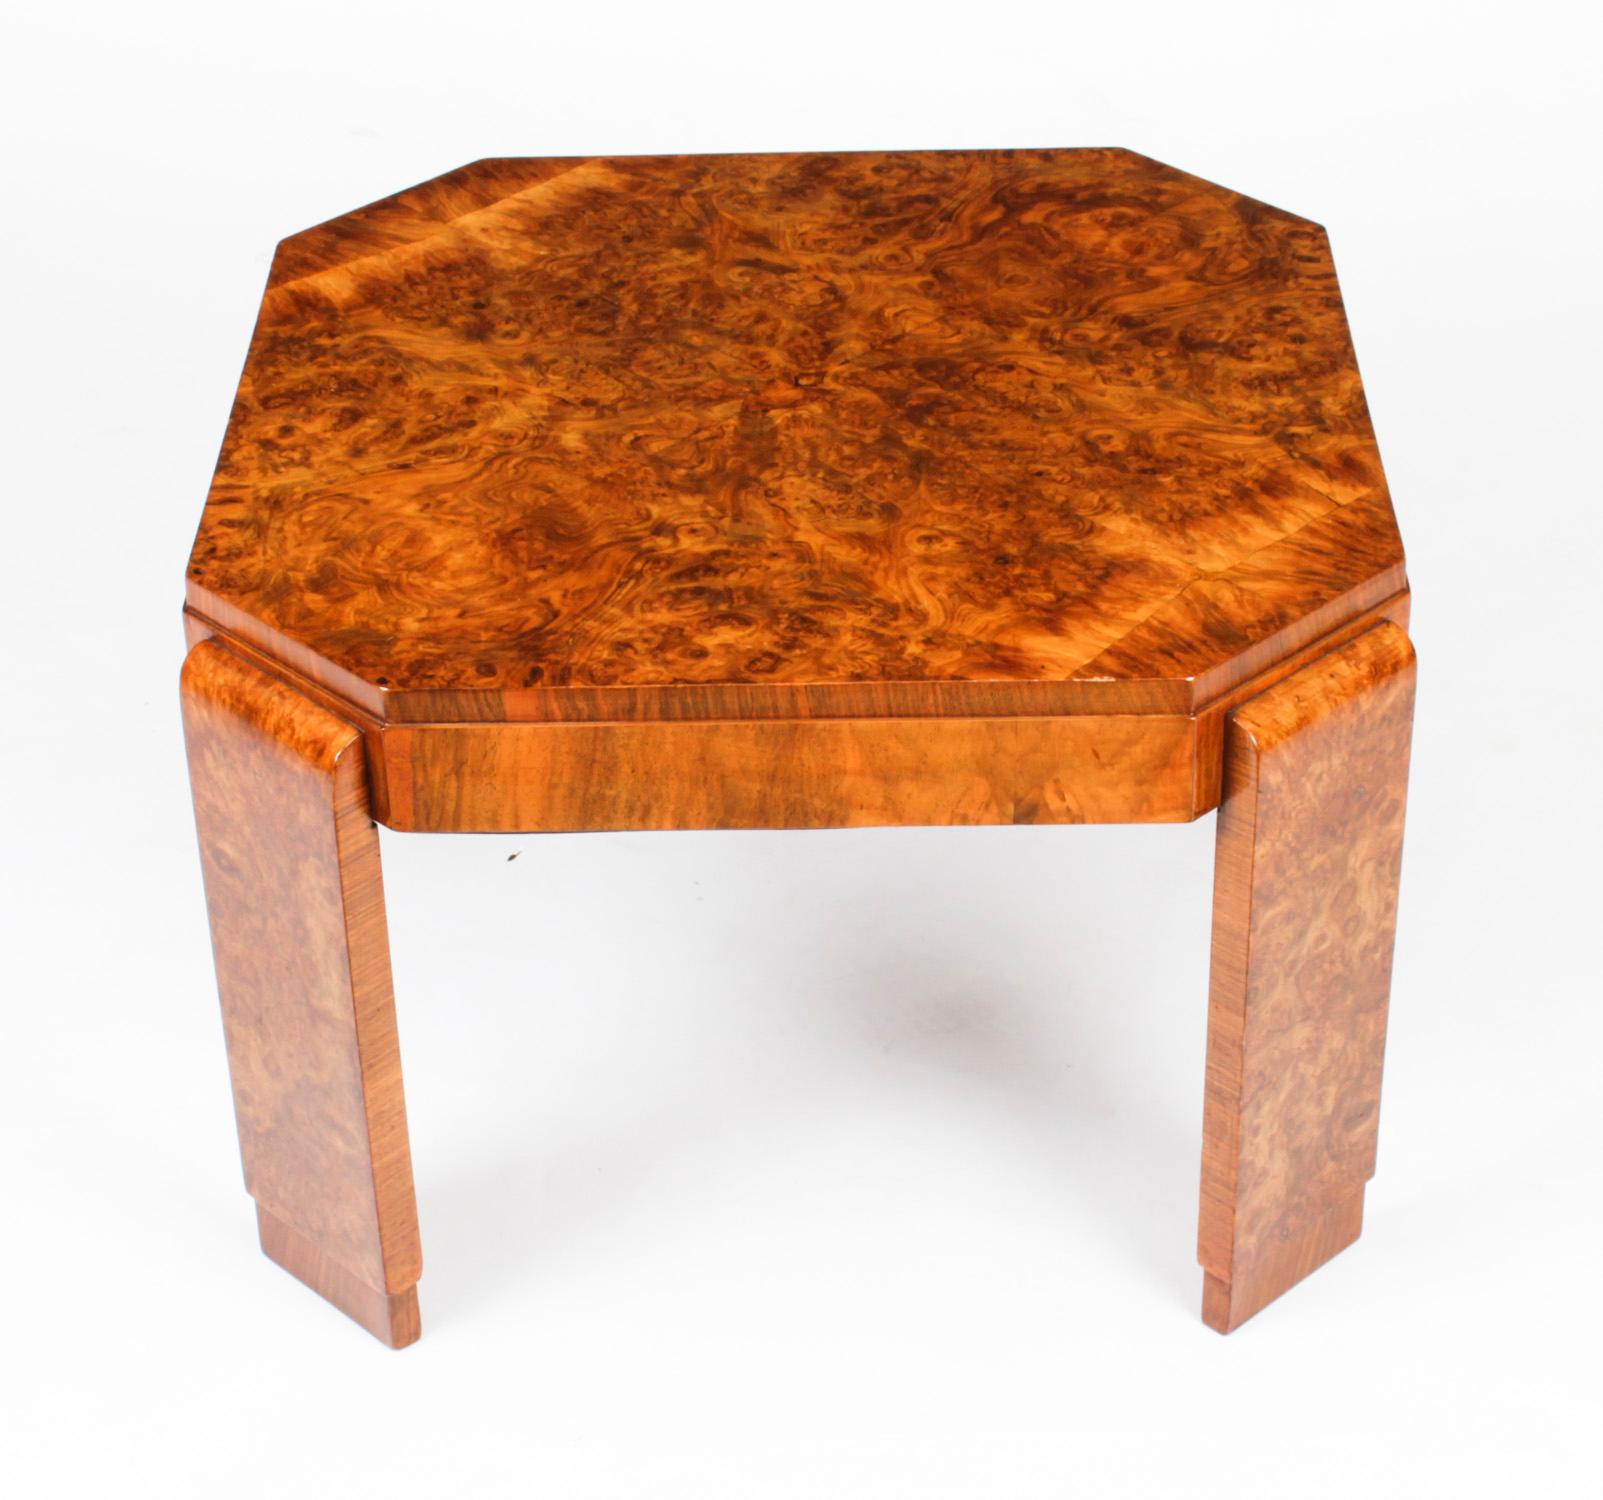 This is a superb antique Art Deco burr walnut coffee table, circa 1920 in date.

It has a wondeful burr walnut square shape table top with cut off corners and is raised on a plain strut supports s typical of the best items of the Art Deco